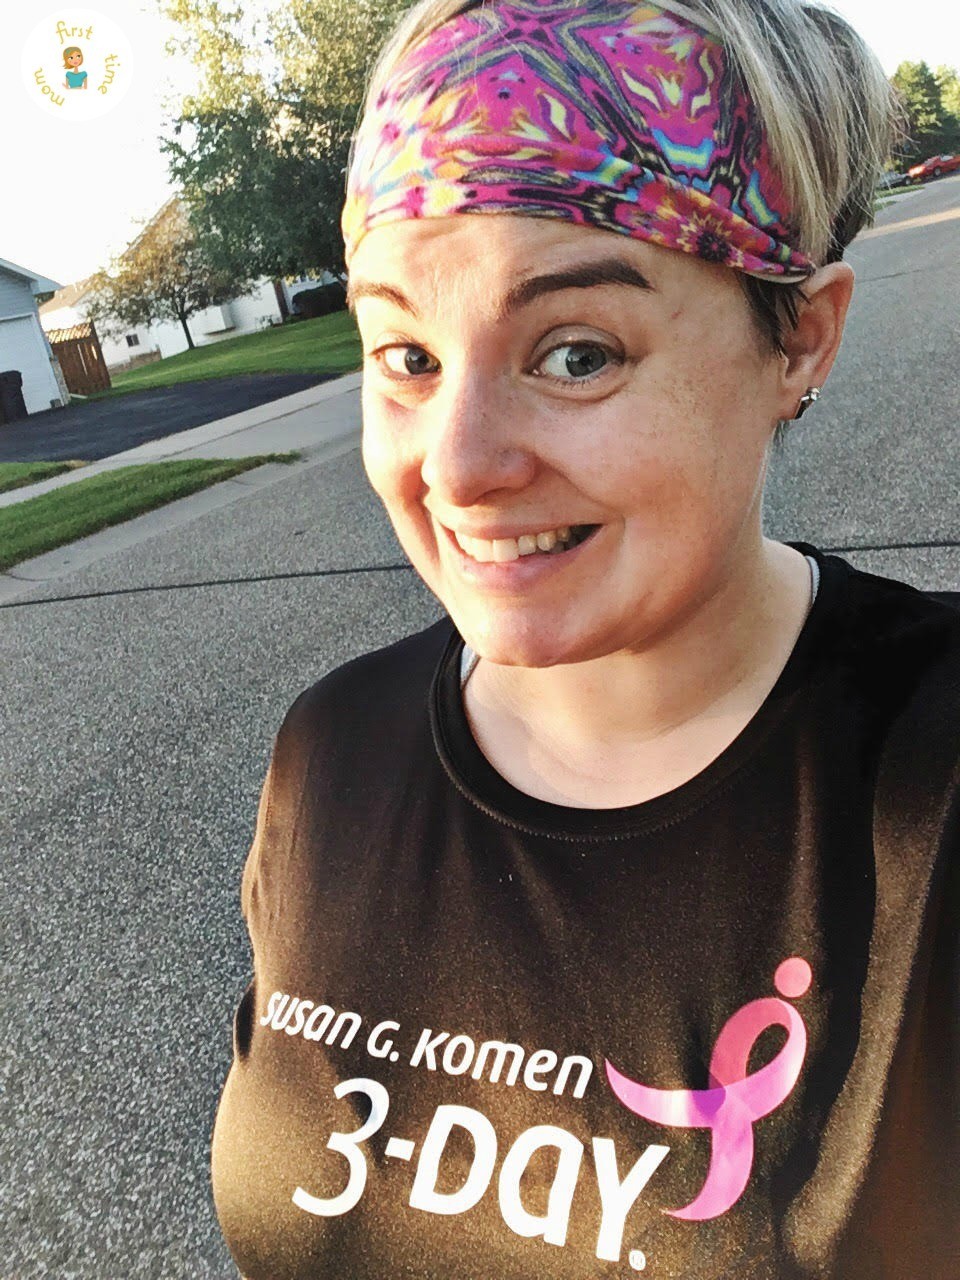 How to train for the Susan G. Komen 3-Day